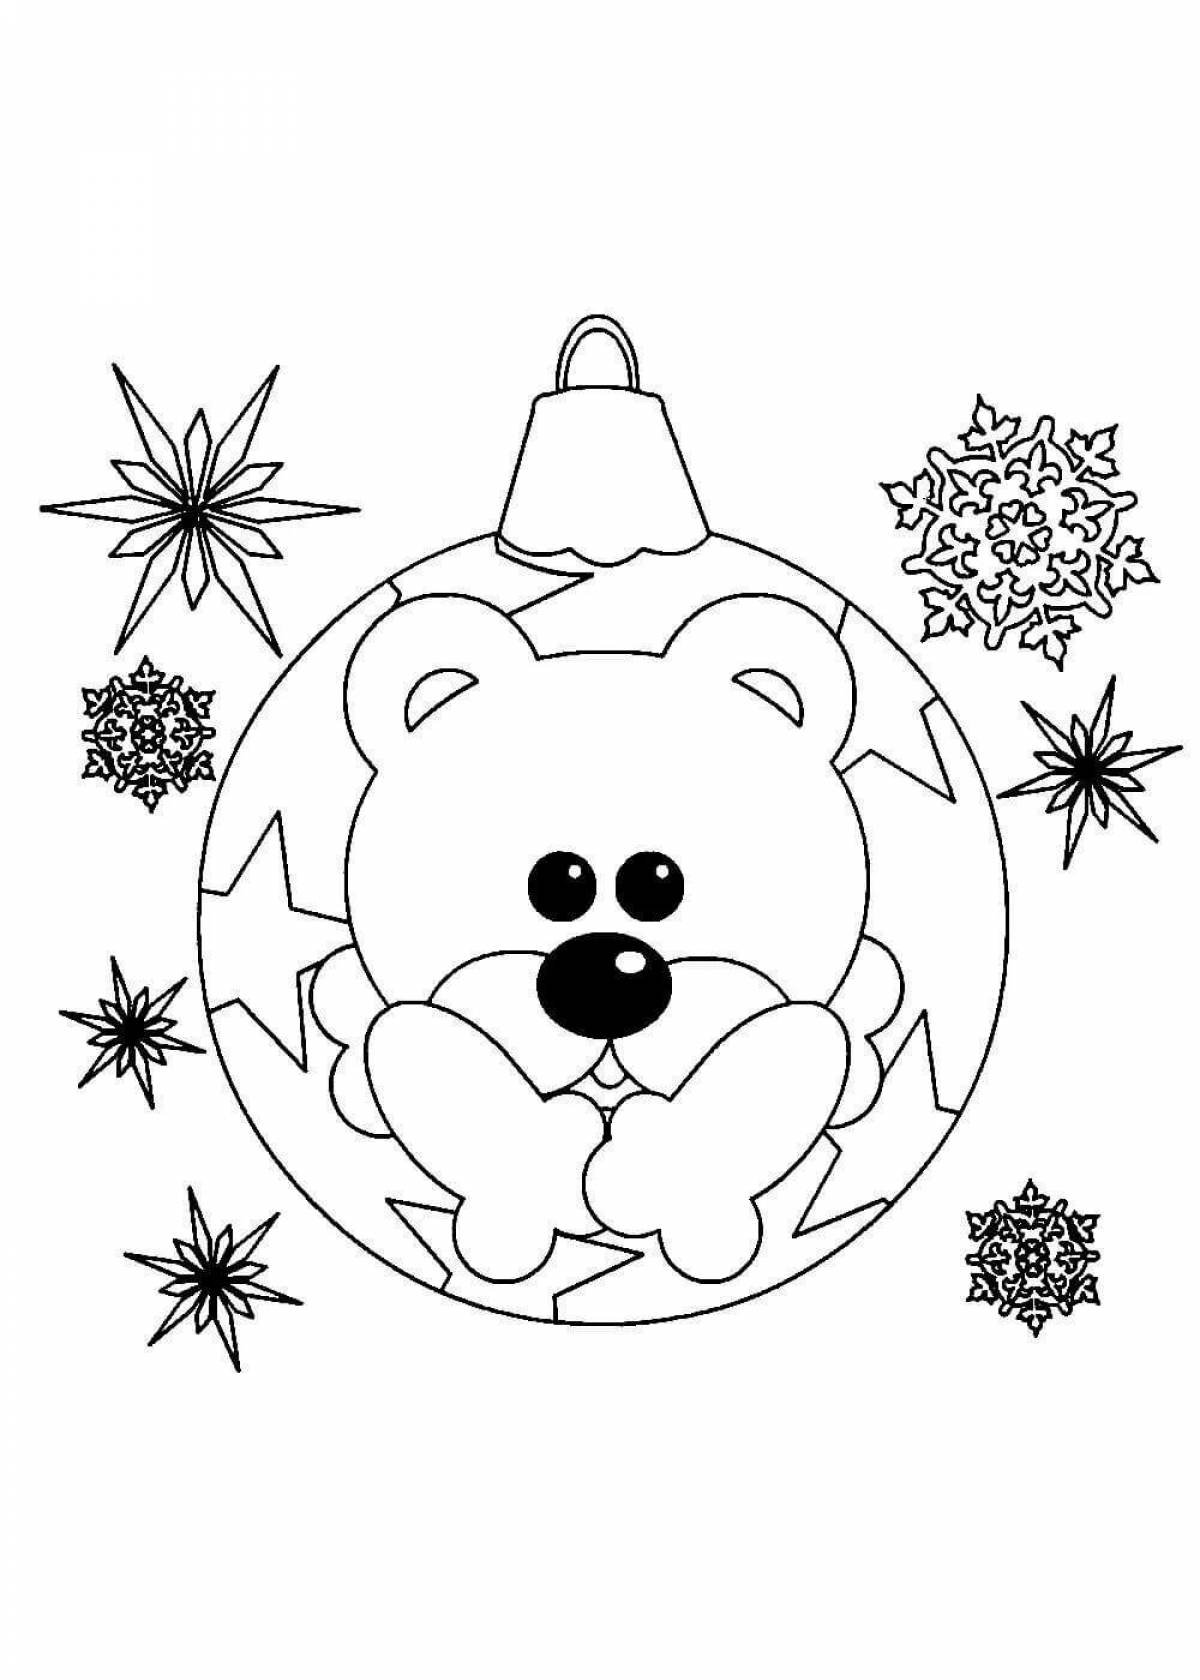 Humorous Christmas coloring toy